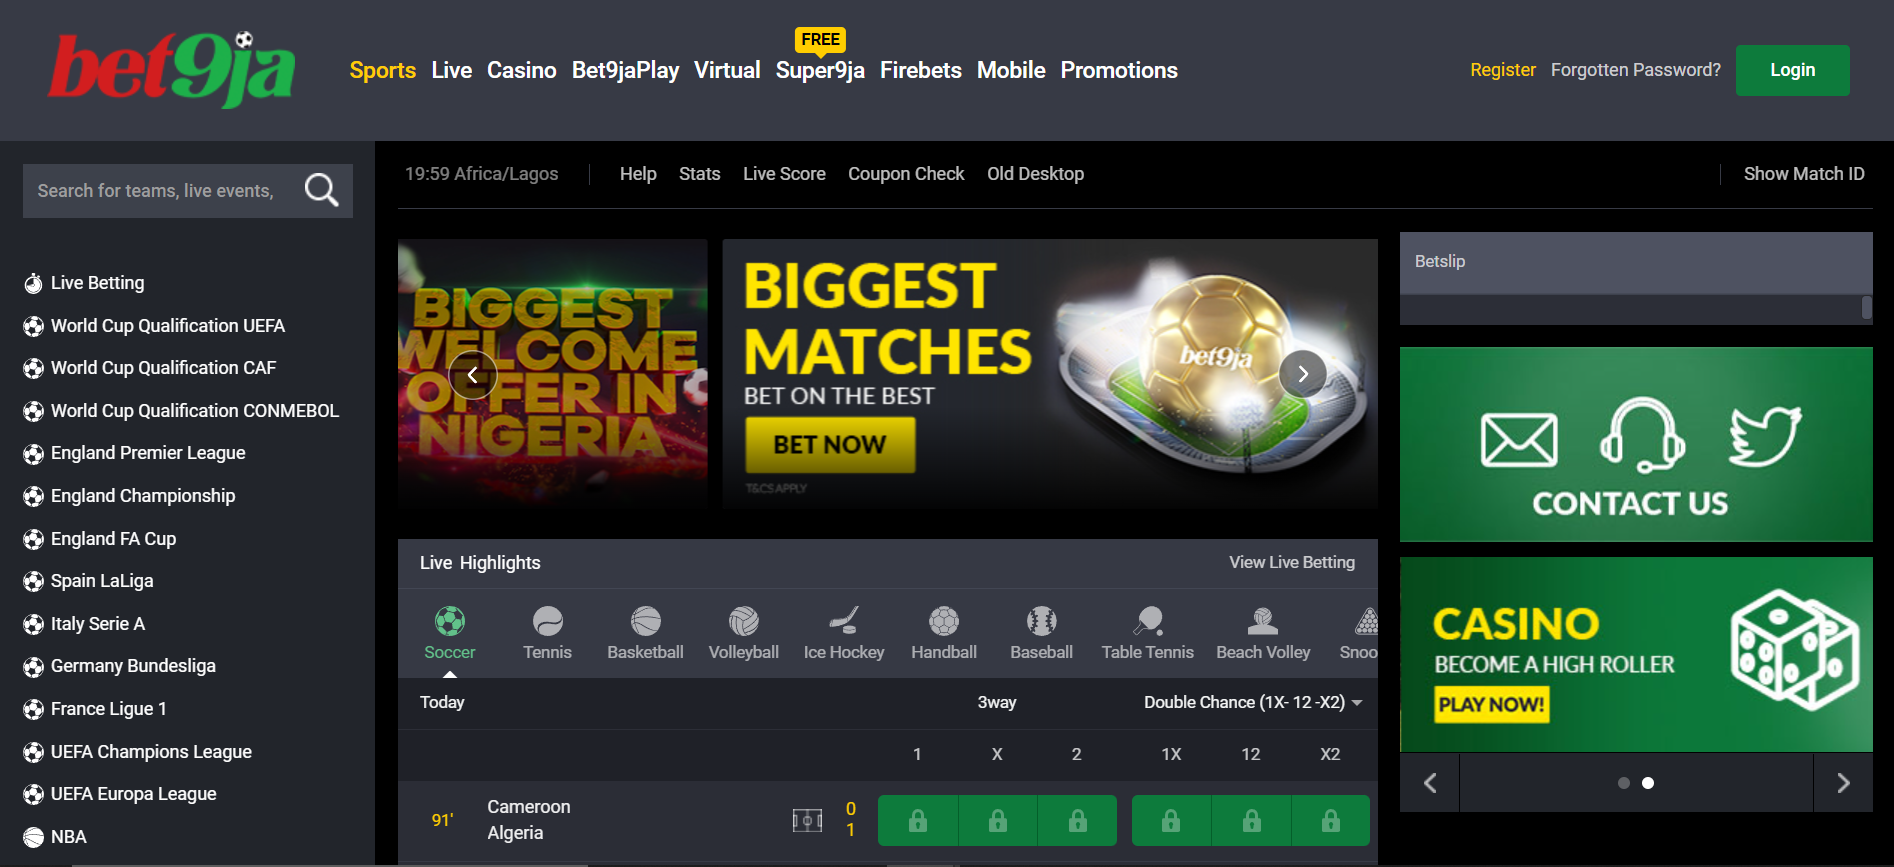 Bet9ja betting site offering registration, sports betting and details on live matches to its users.